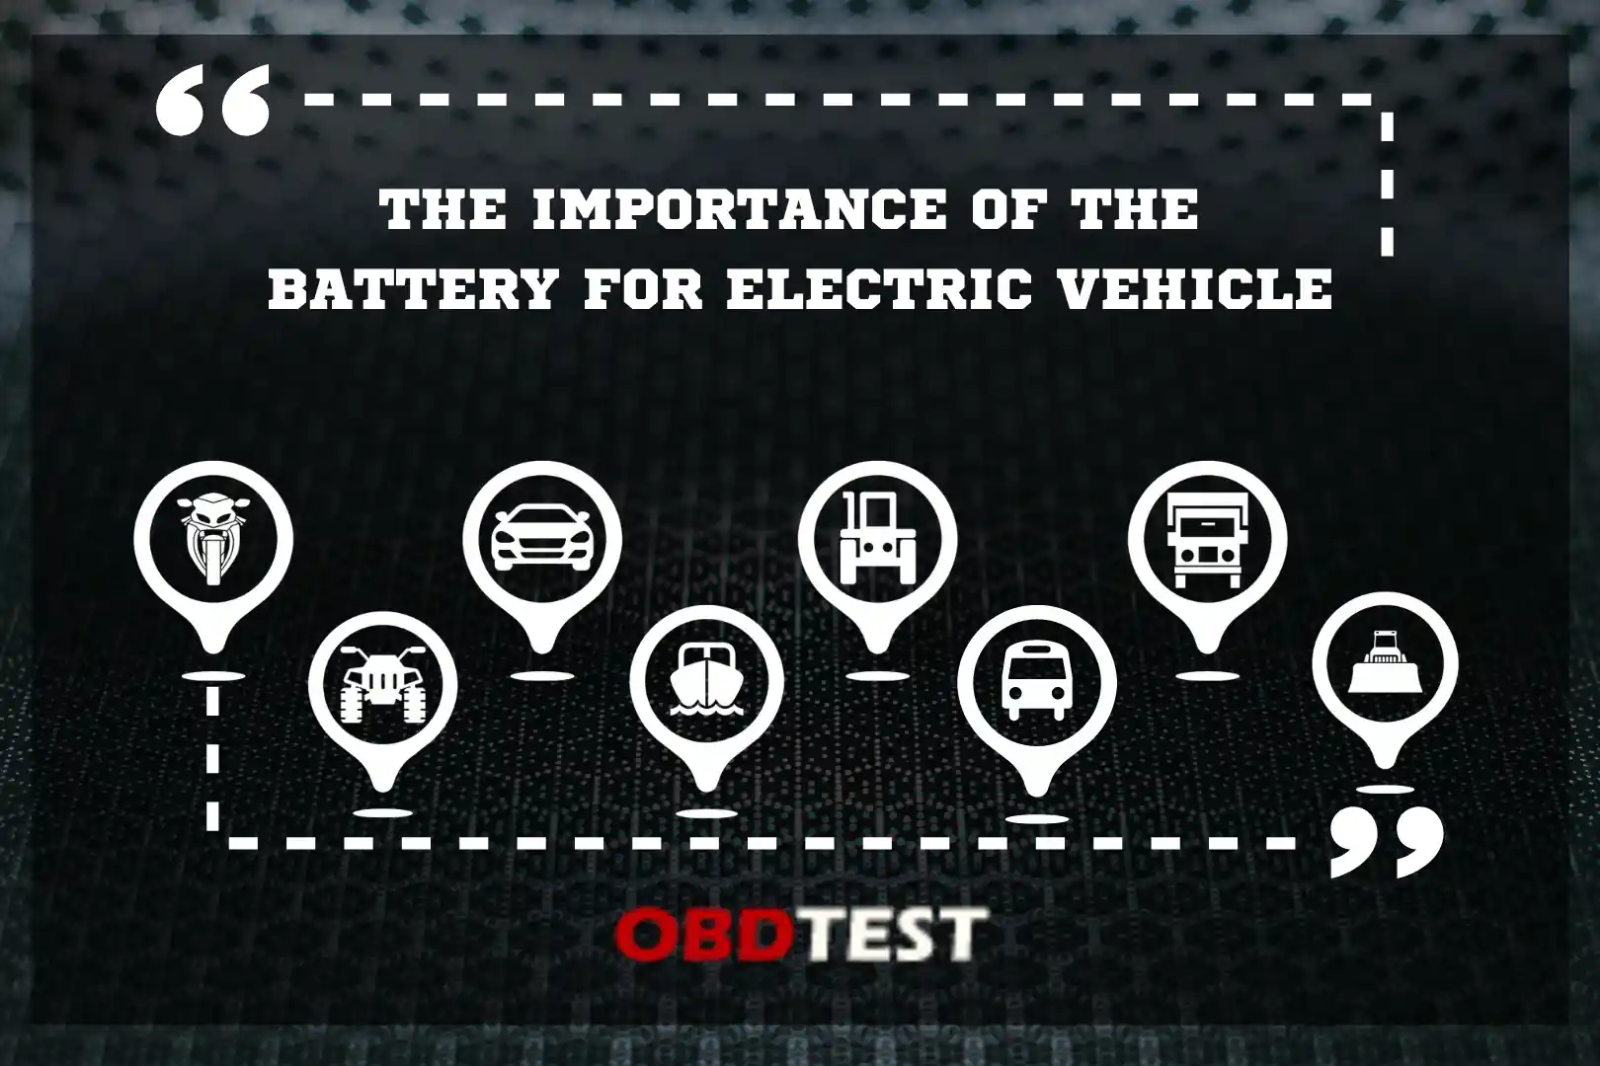 The importance of the battery in electric vehicles